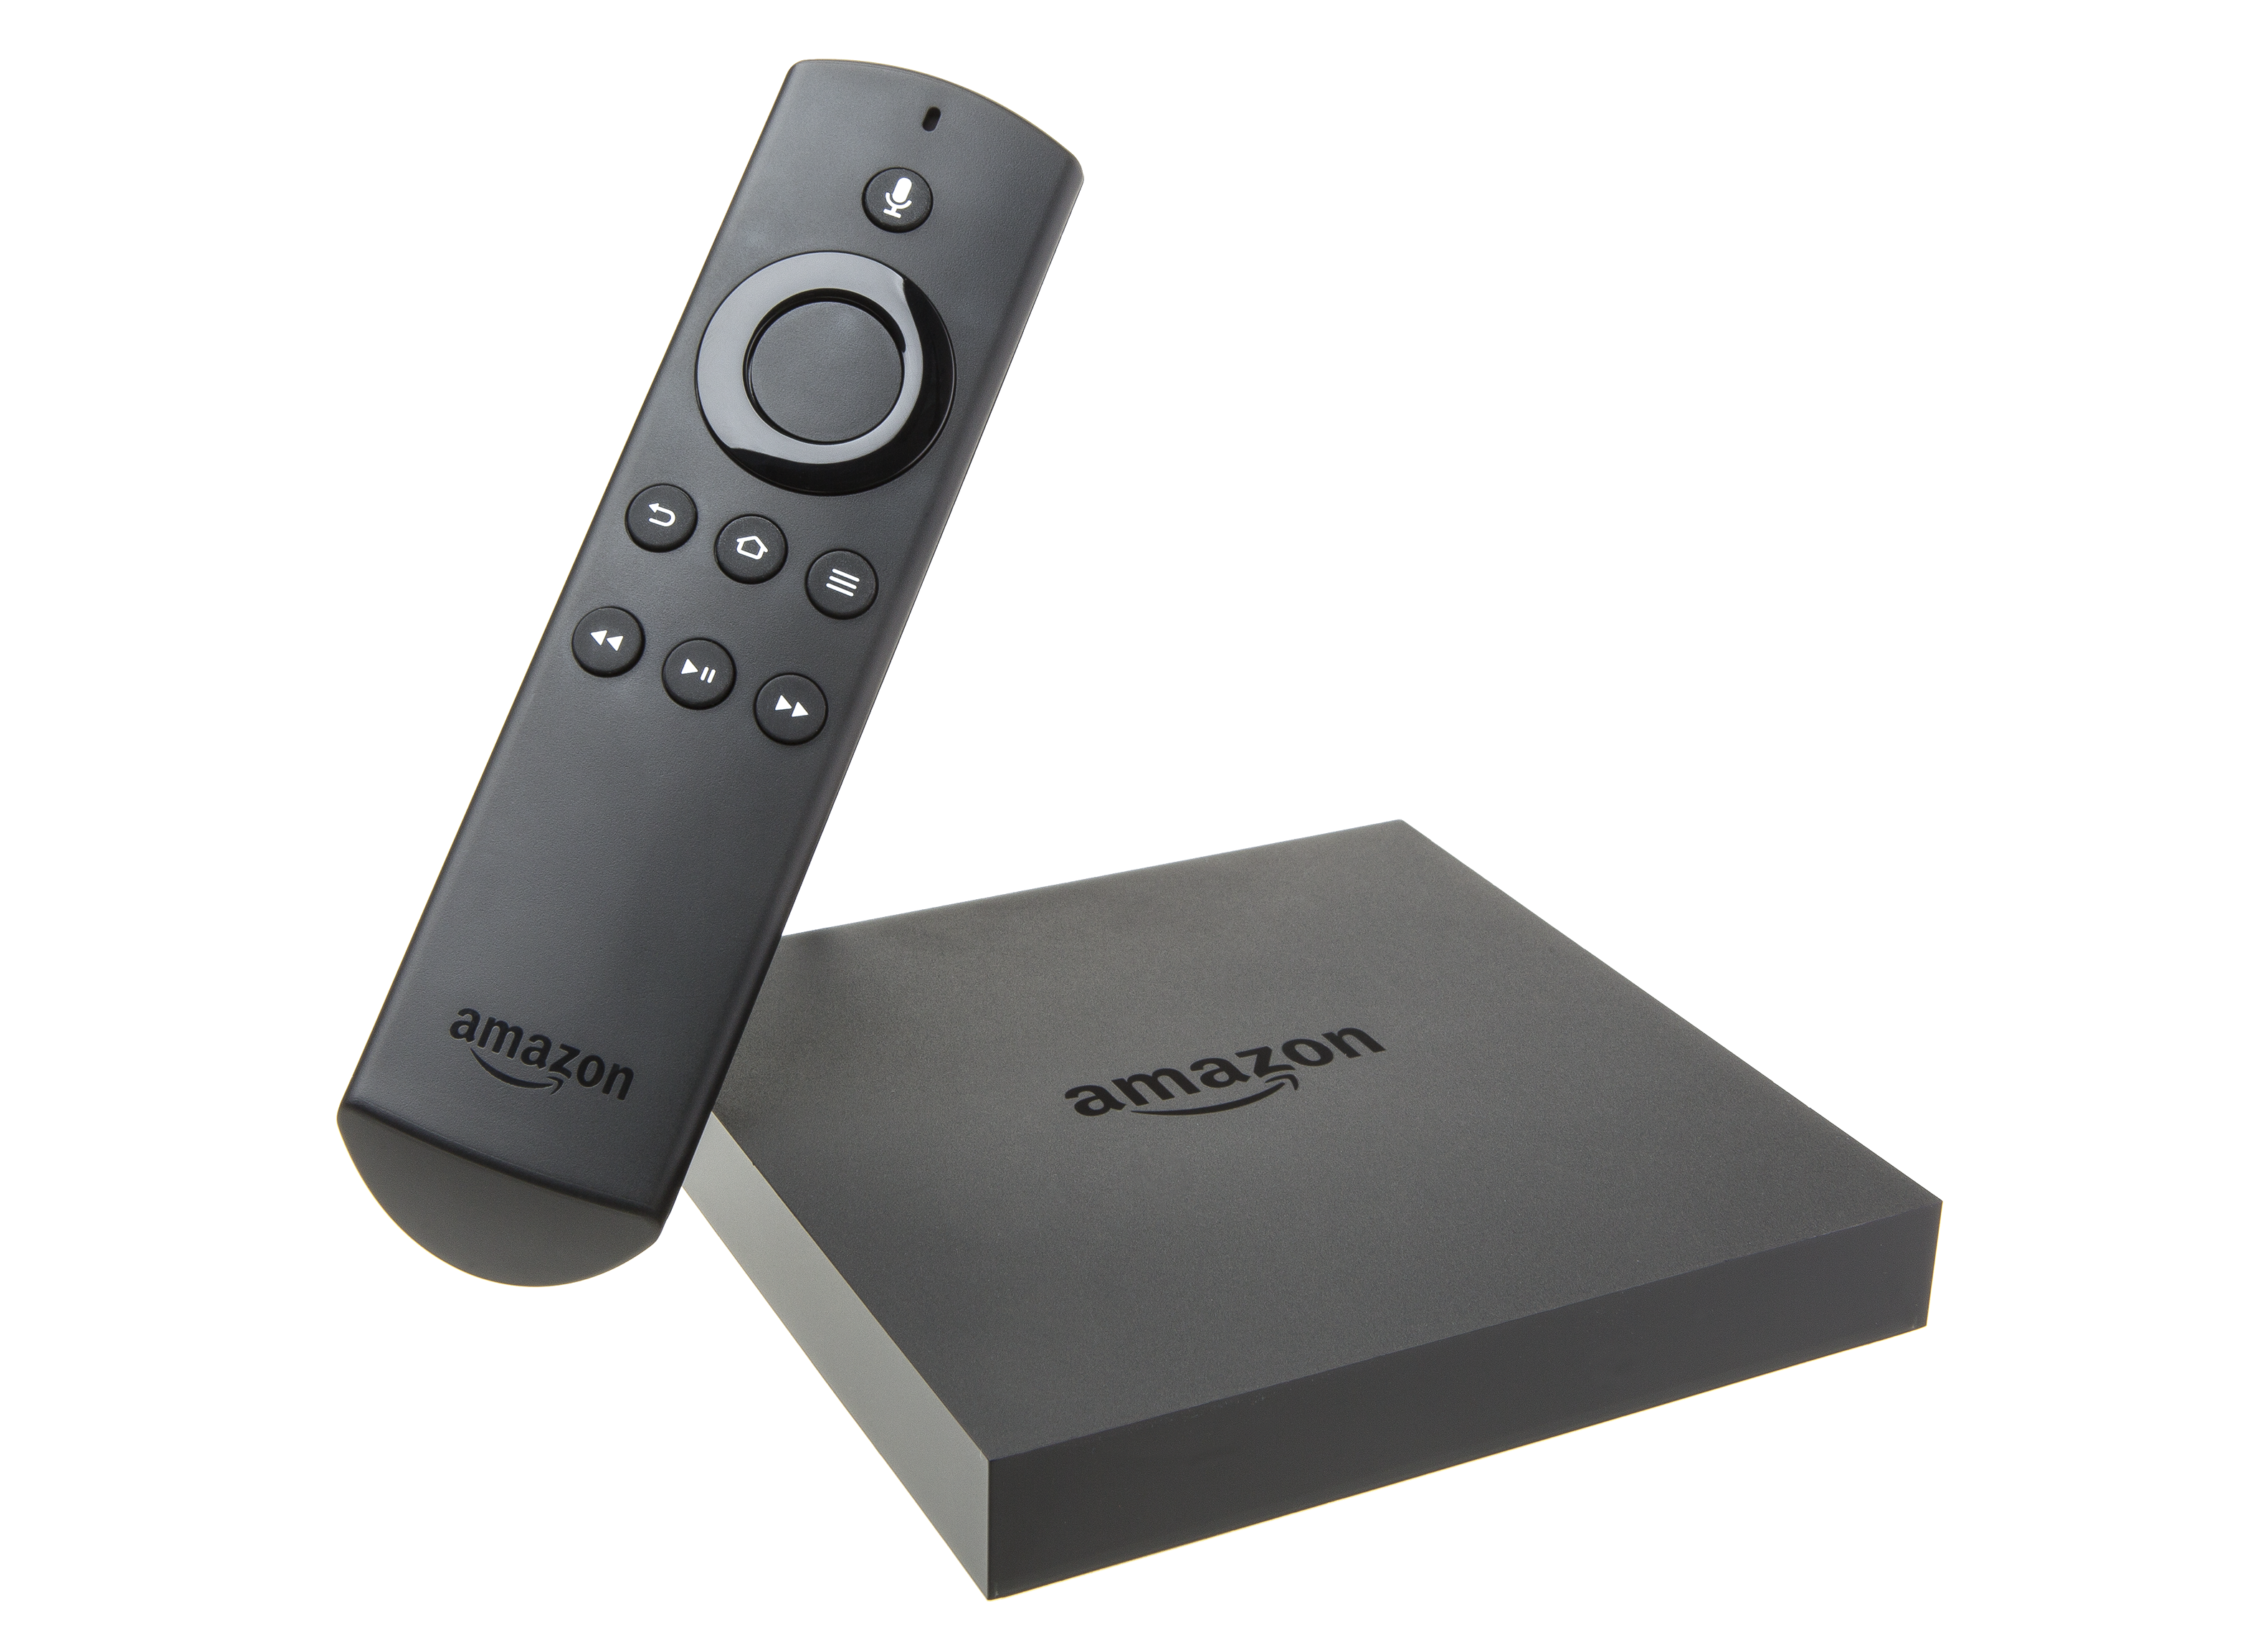 Amazon Fire TV (2nd Gen) Streaming Media - Consumer Reports